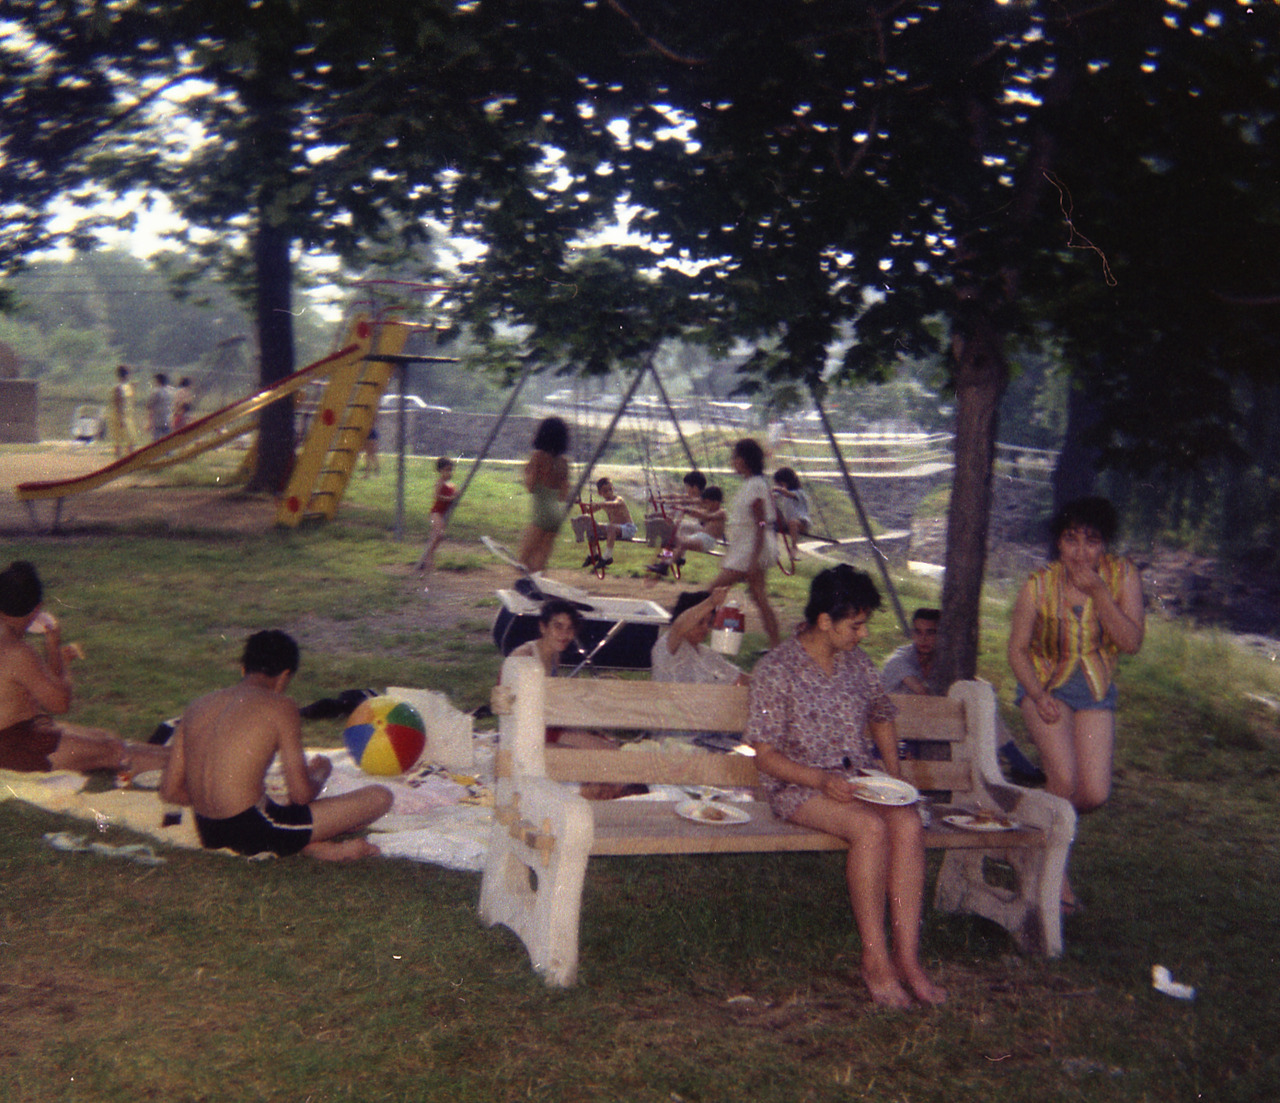 American playground around 1960. Note the happy children, swingsets and slides.